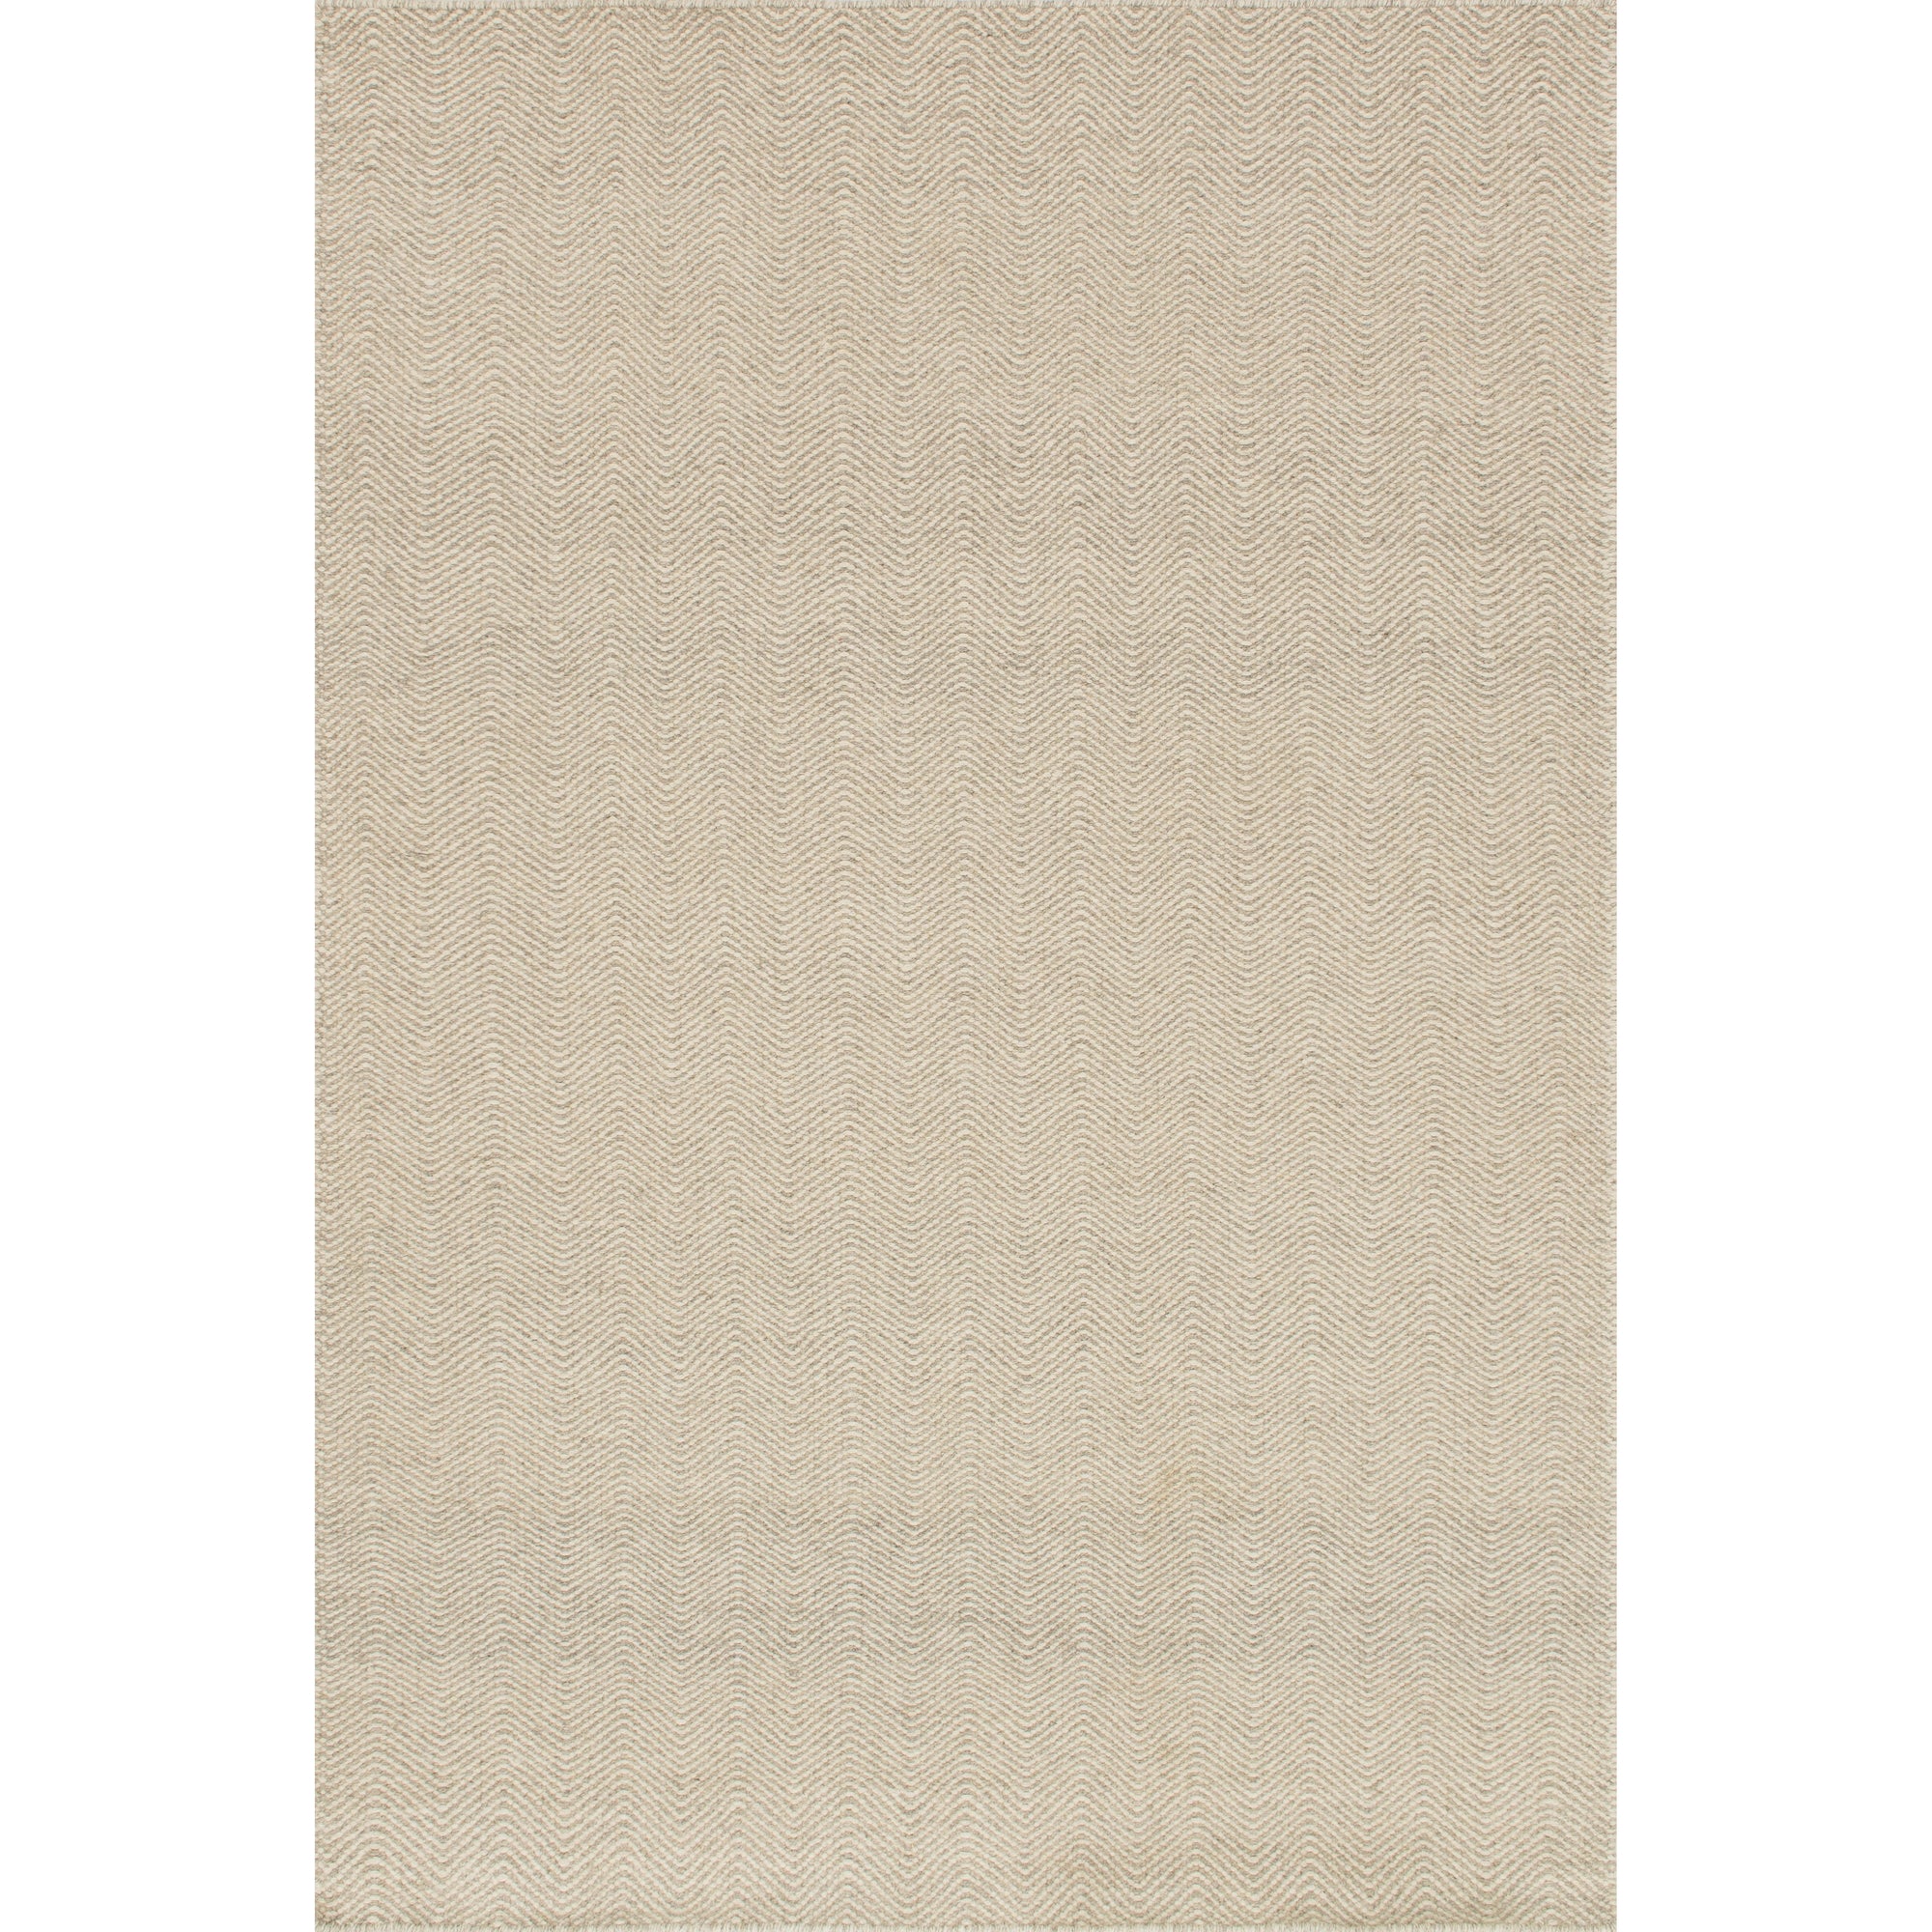 Rugs by Roo Loloi Oakwood Gravel Area Rug in size 3' 6" x 5' 6"